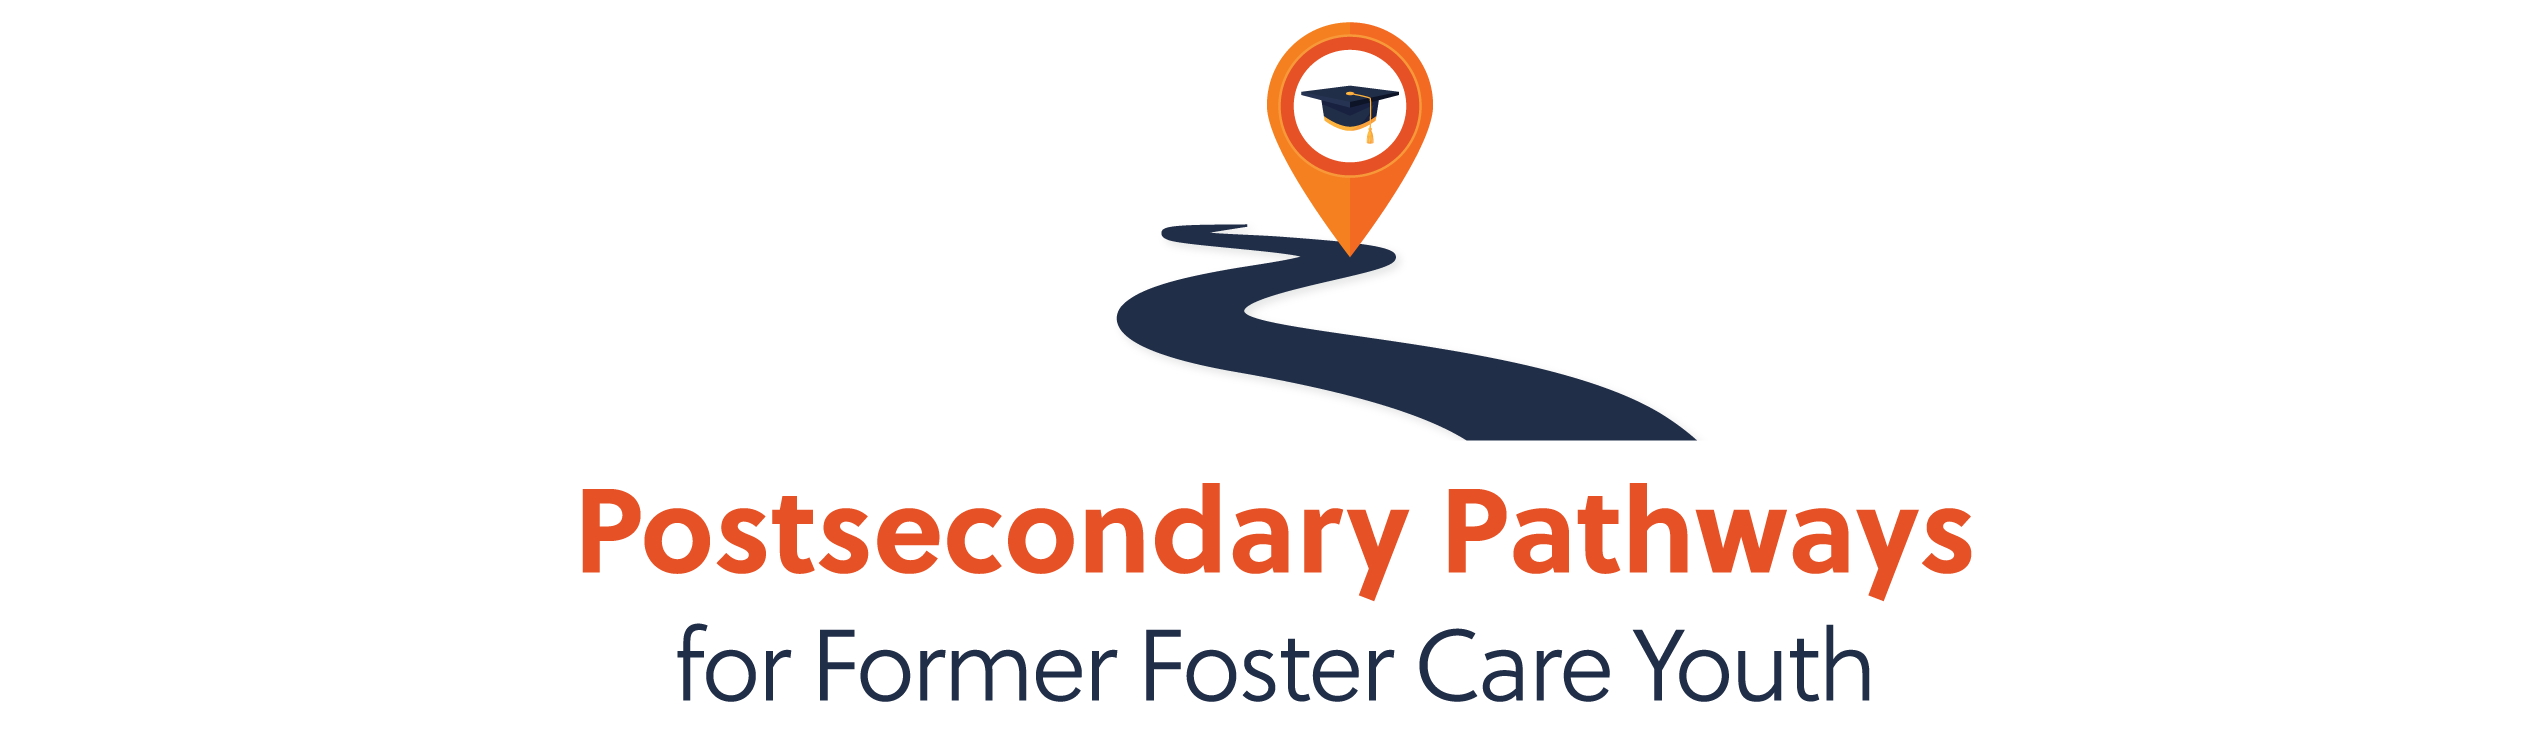 Postsecondary Pathways for Former Foster Care Youth